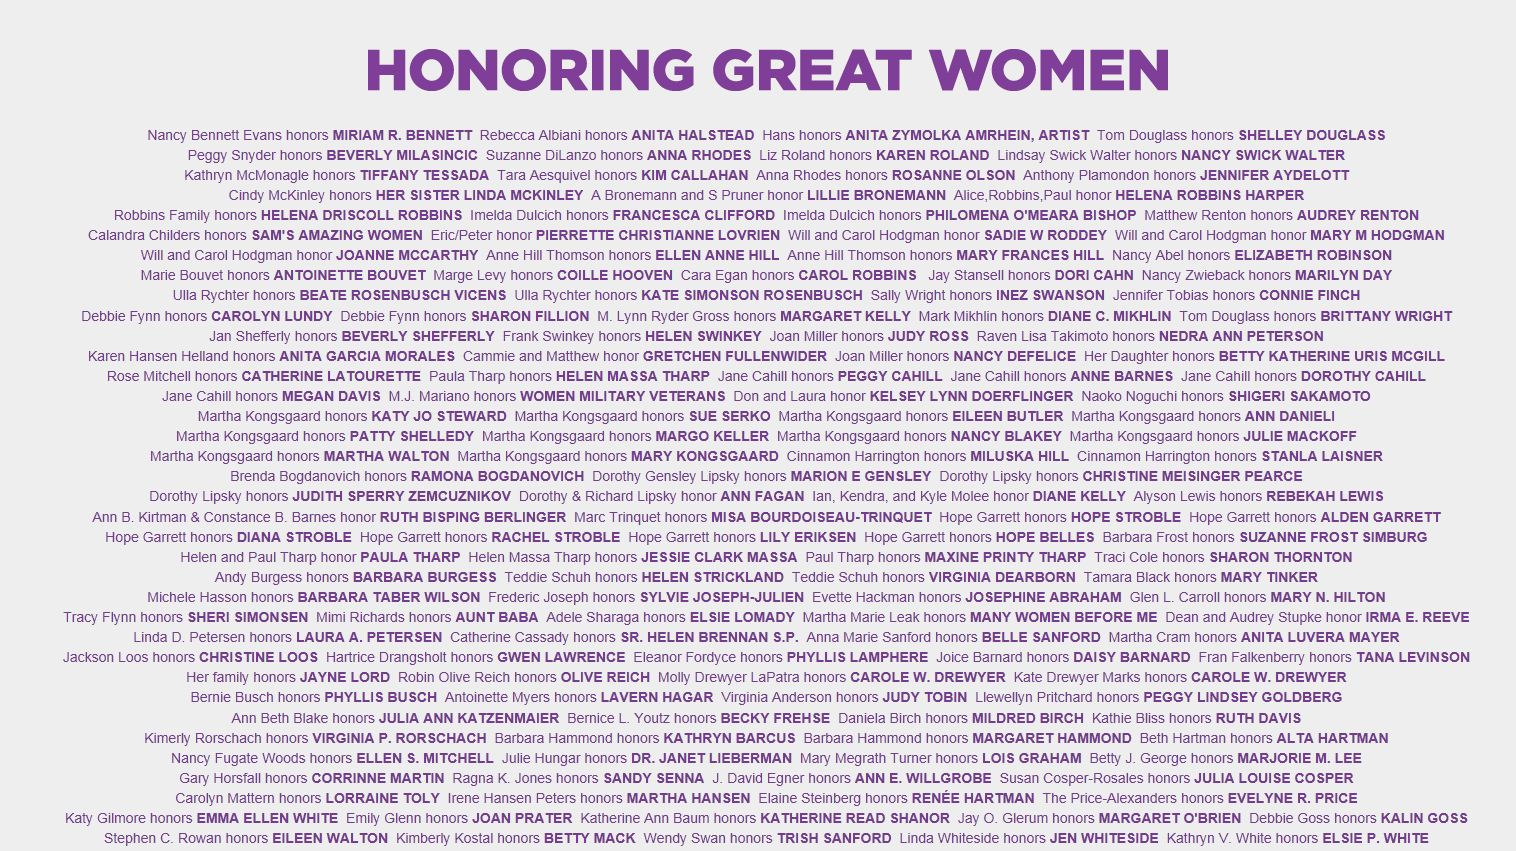 Honor a Woman Today!  Wall of Women